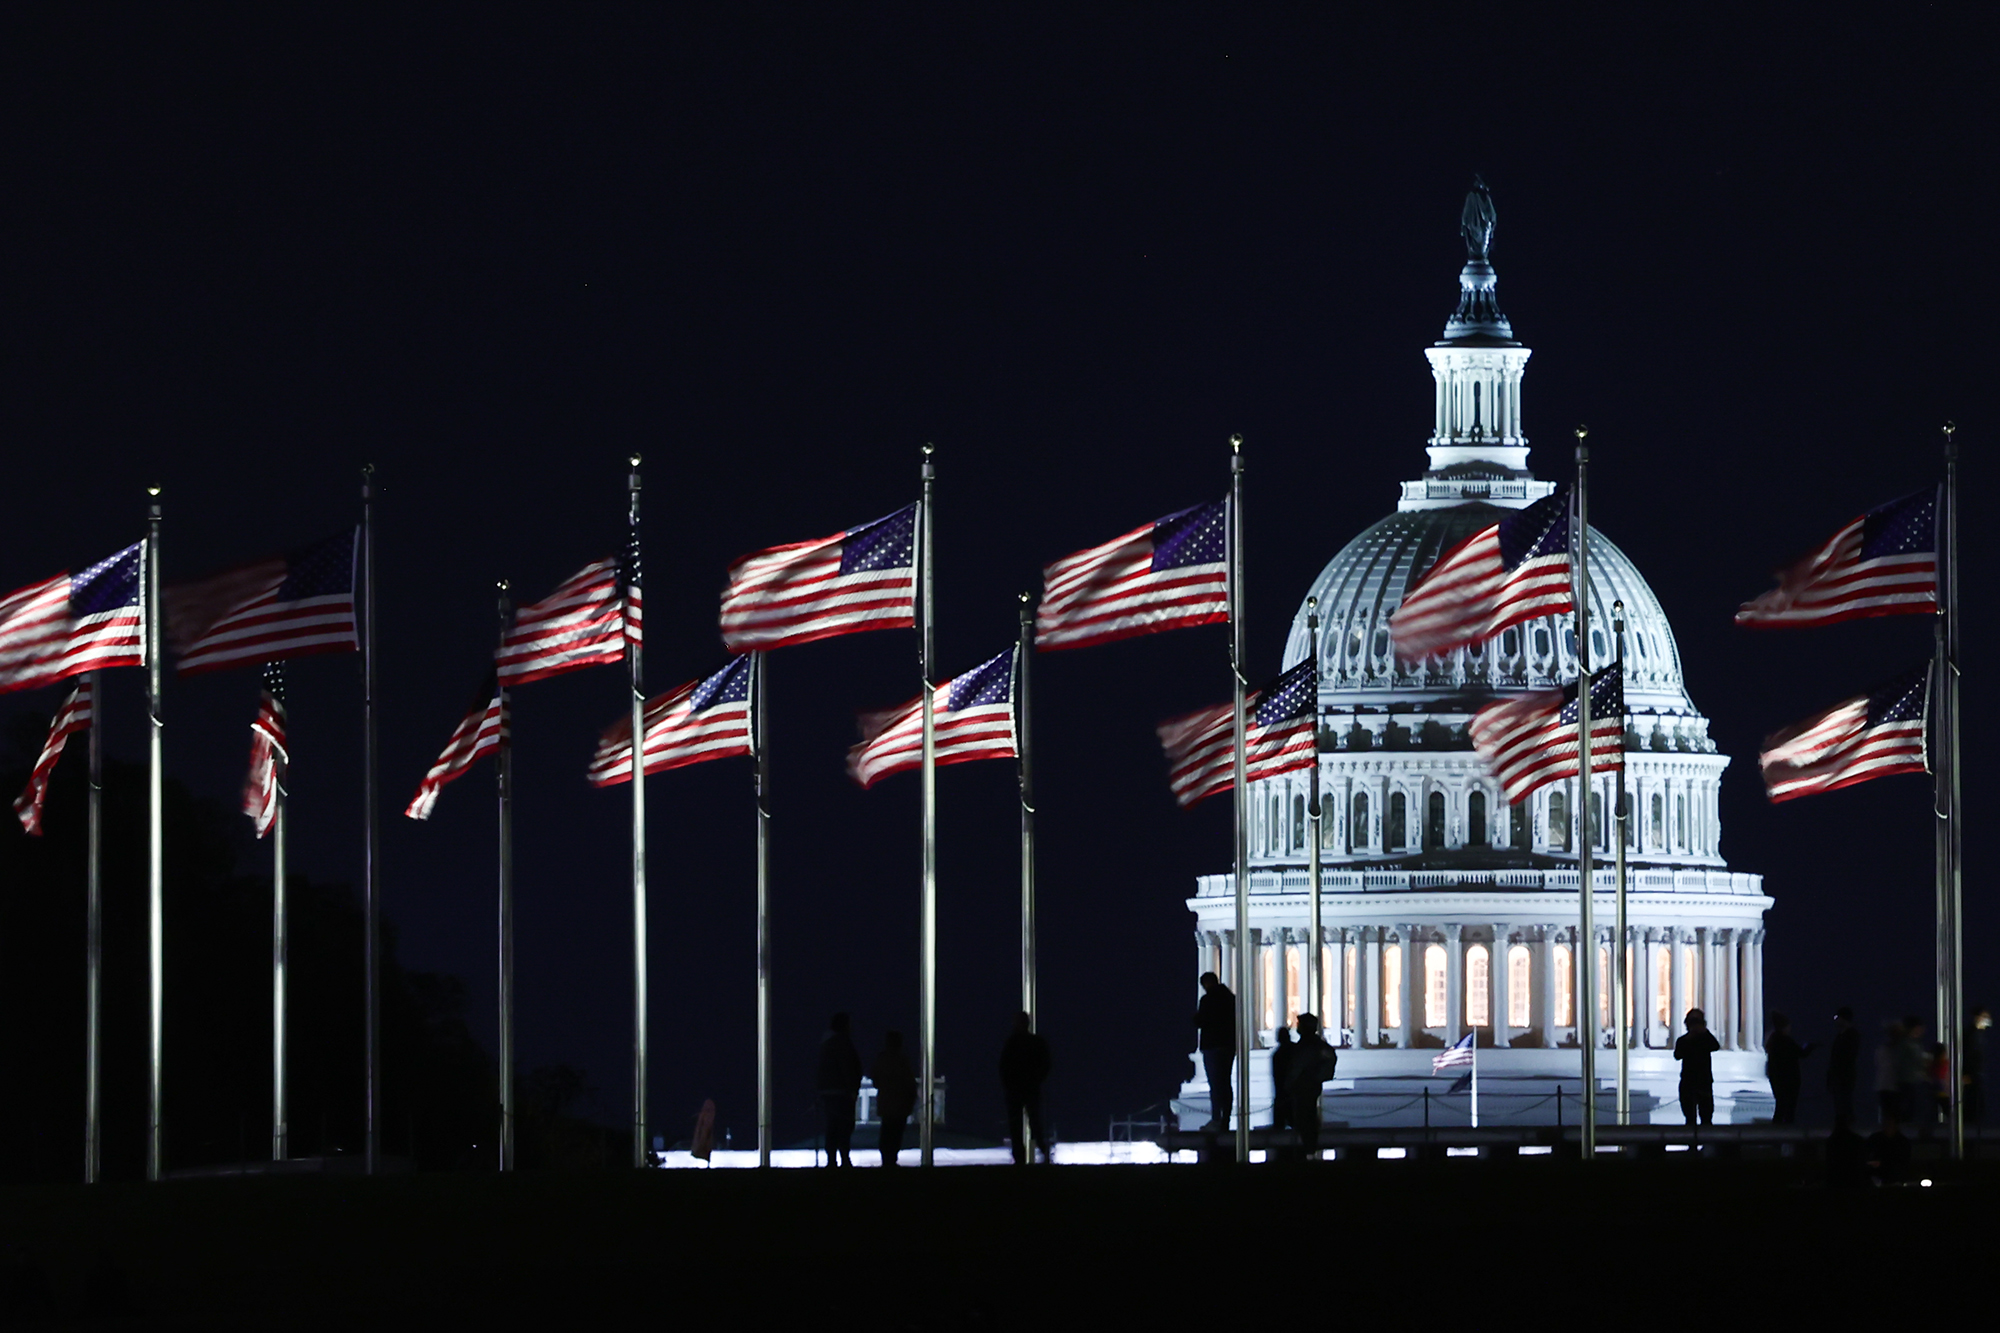 The Capitol building is seen through the American flags in Washington, D.C. on October 20.